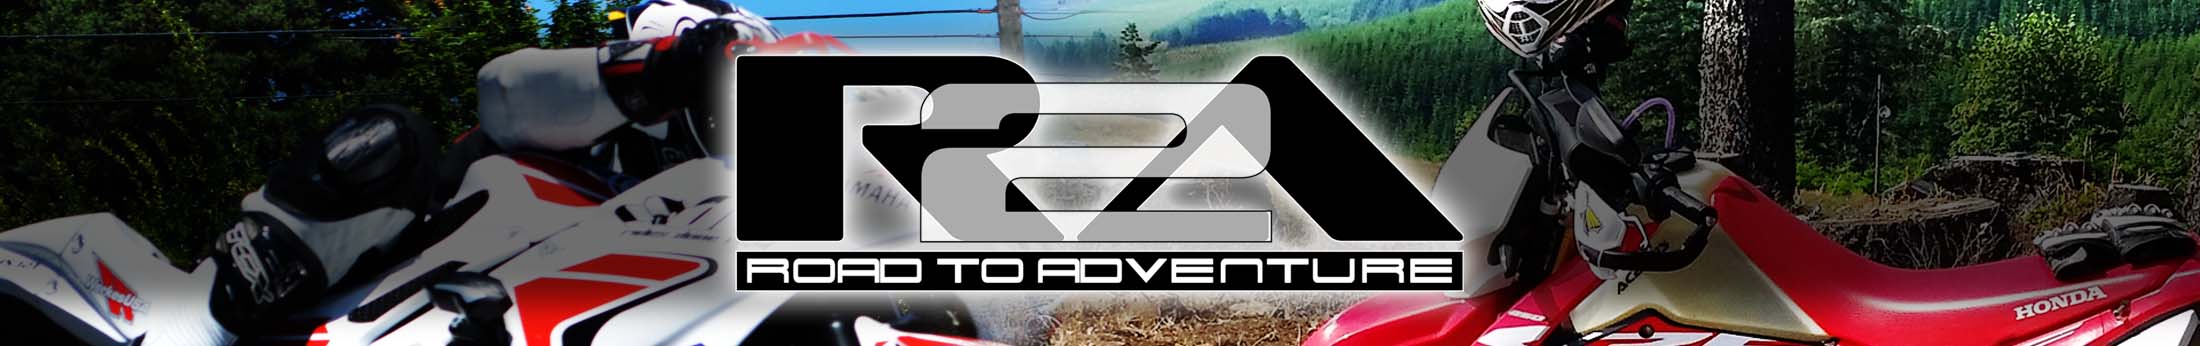 Road to Adventure (R2A)